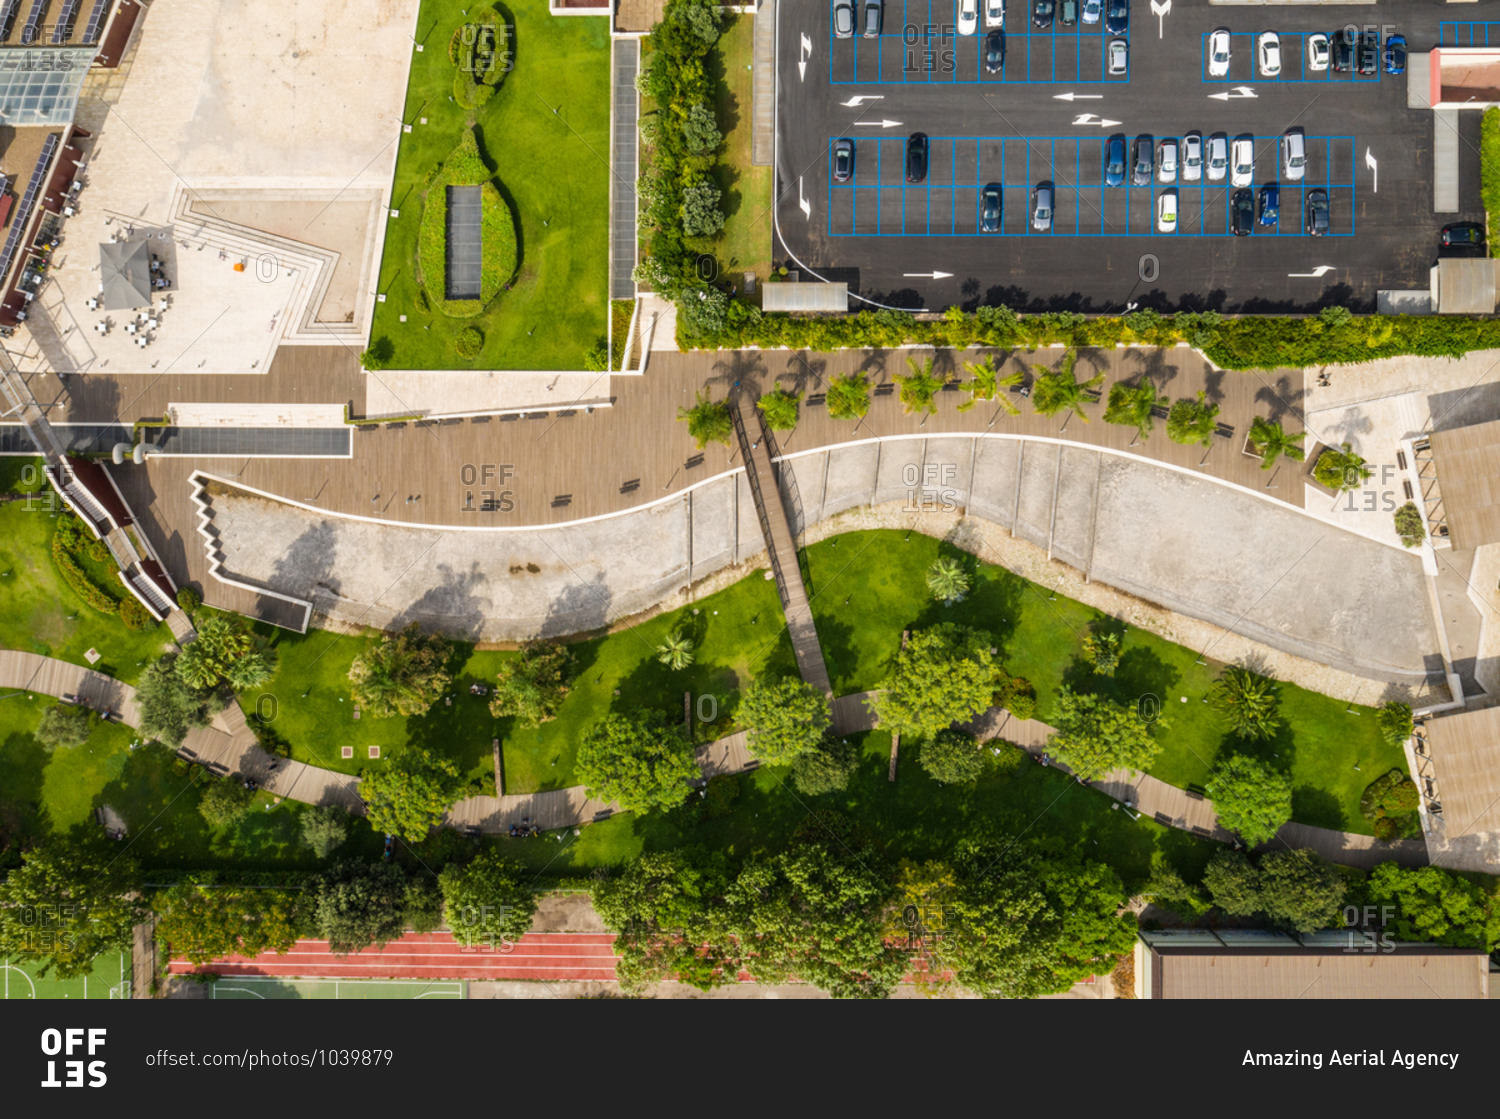 Aerial view of parking lot in urban setting in the city of Cagliari in Sardinia, Italy.